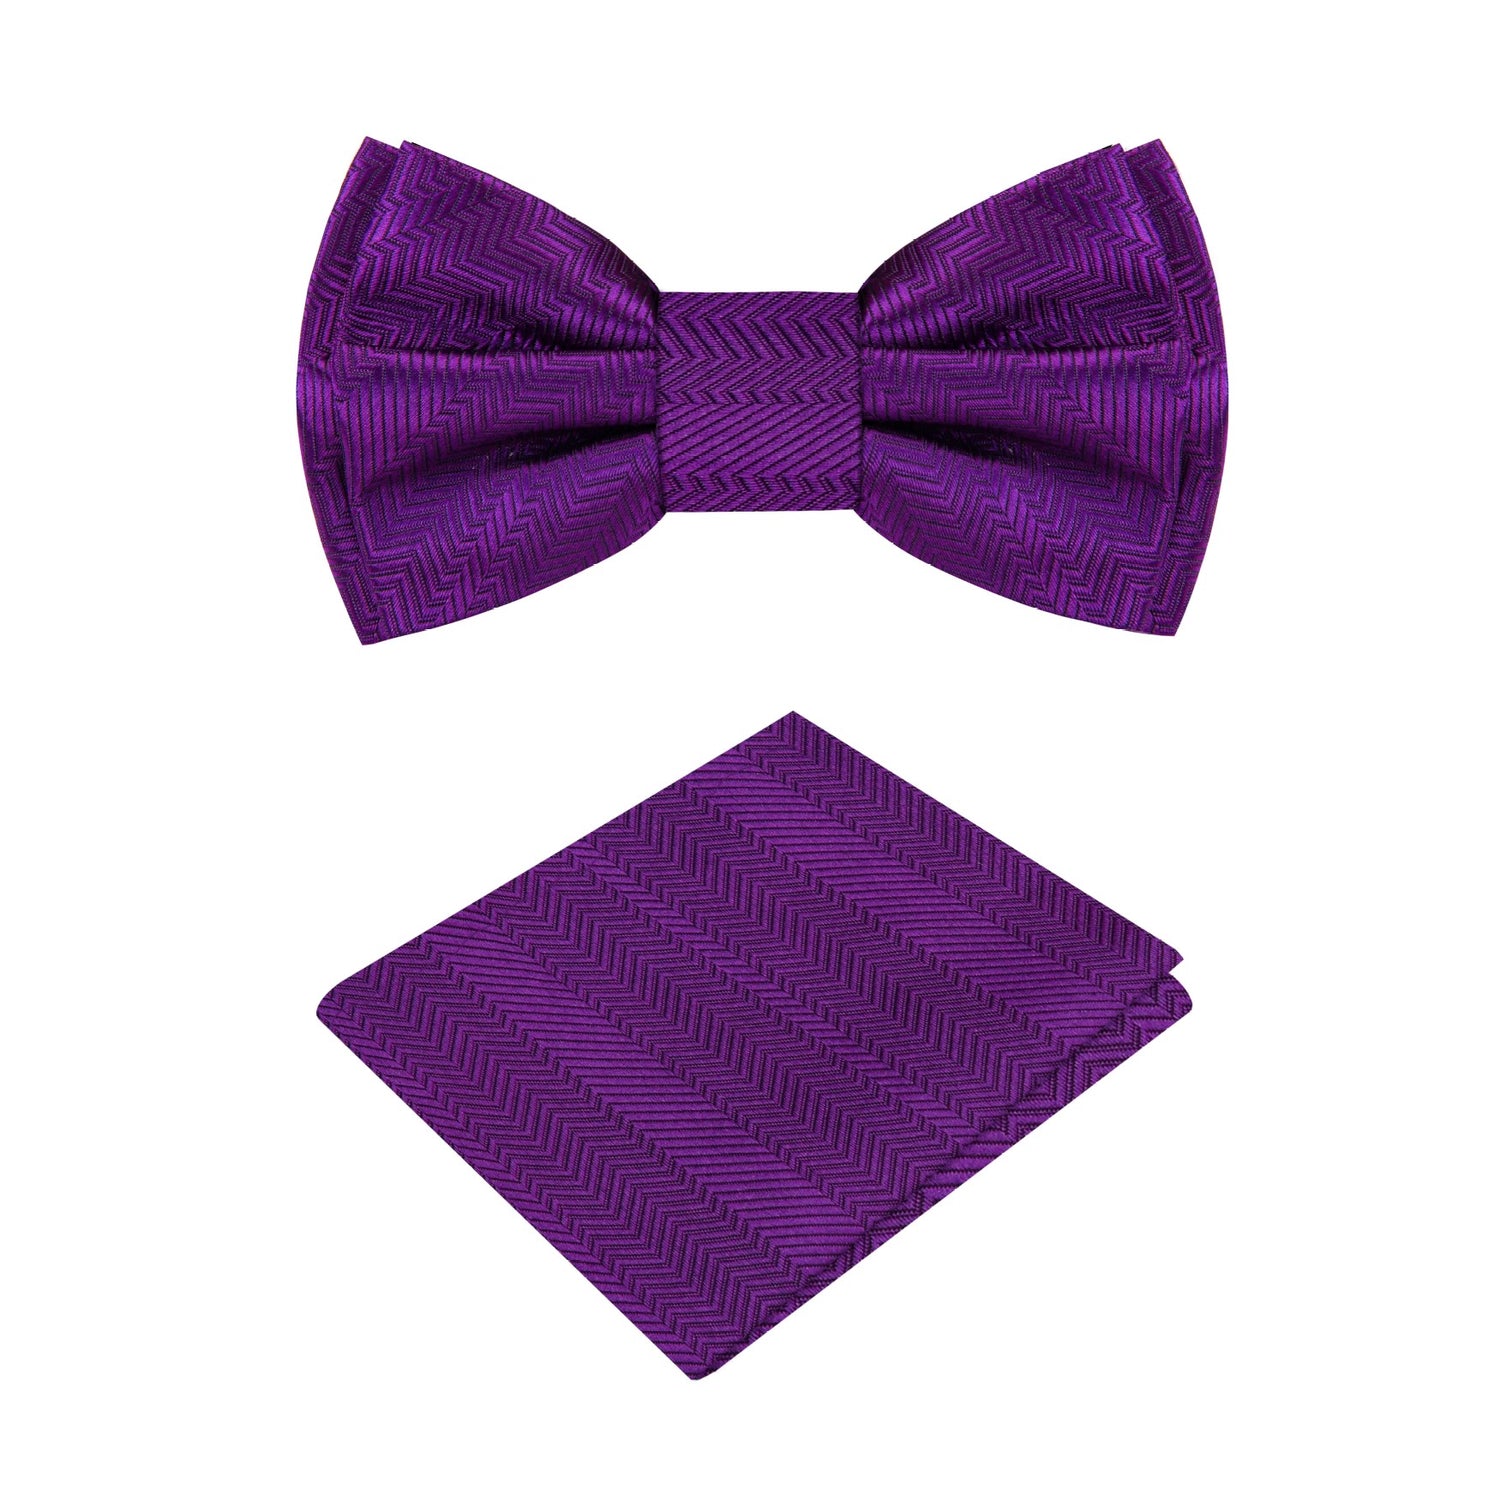 A Classy Purple Solid Pattern Self Tie Bow Tie, Matching Pocket Square